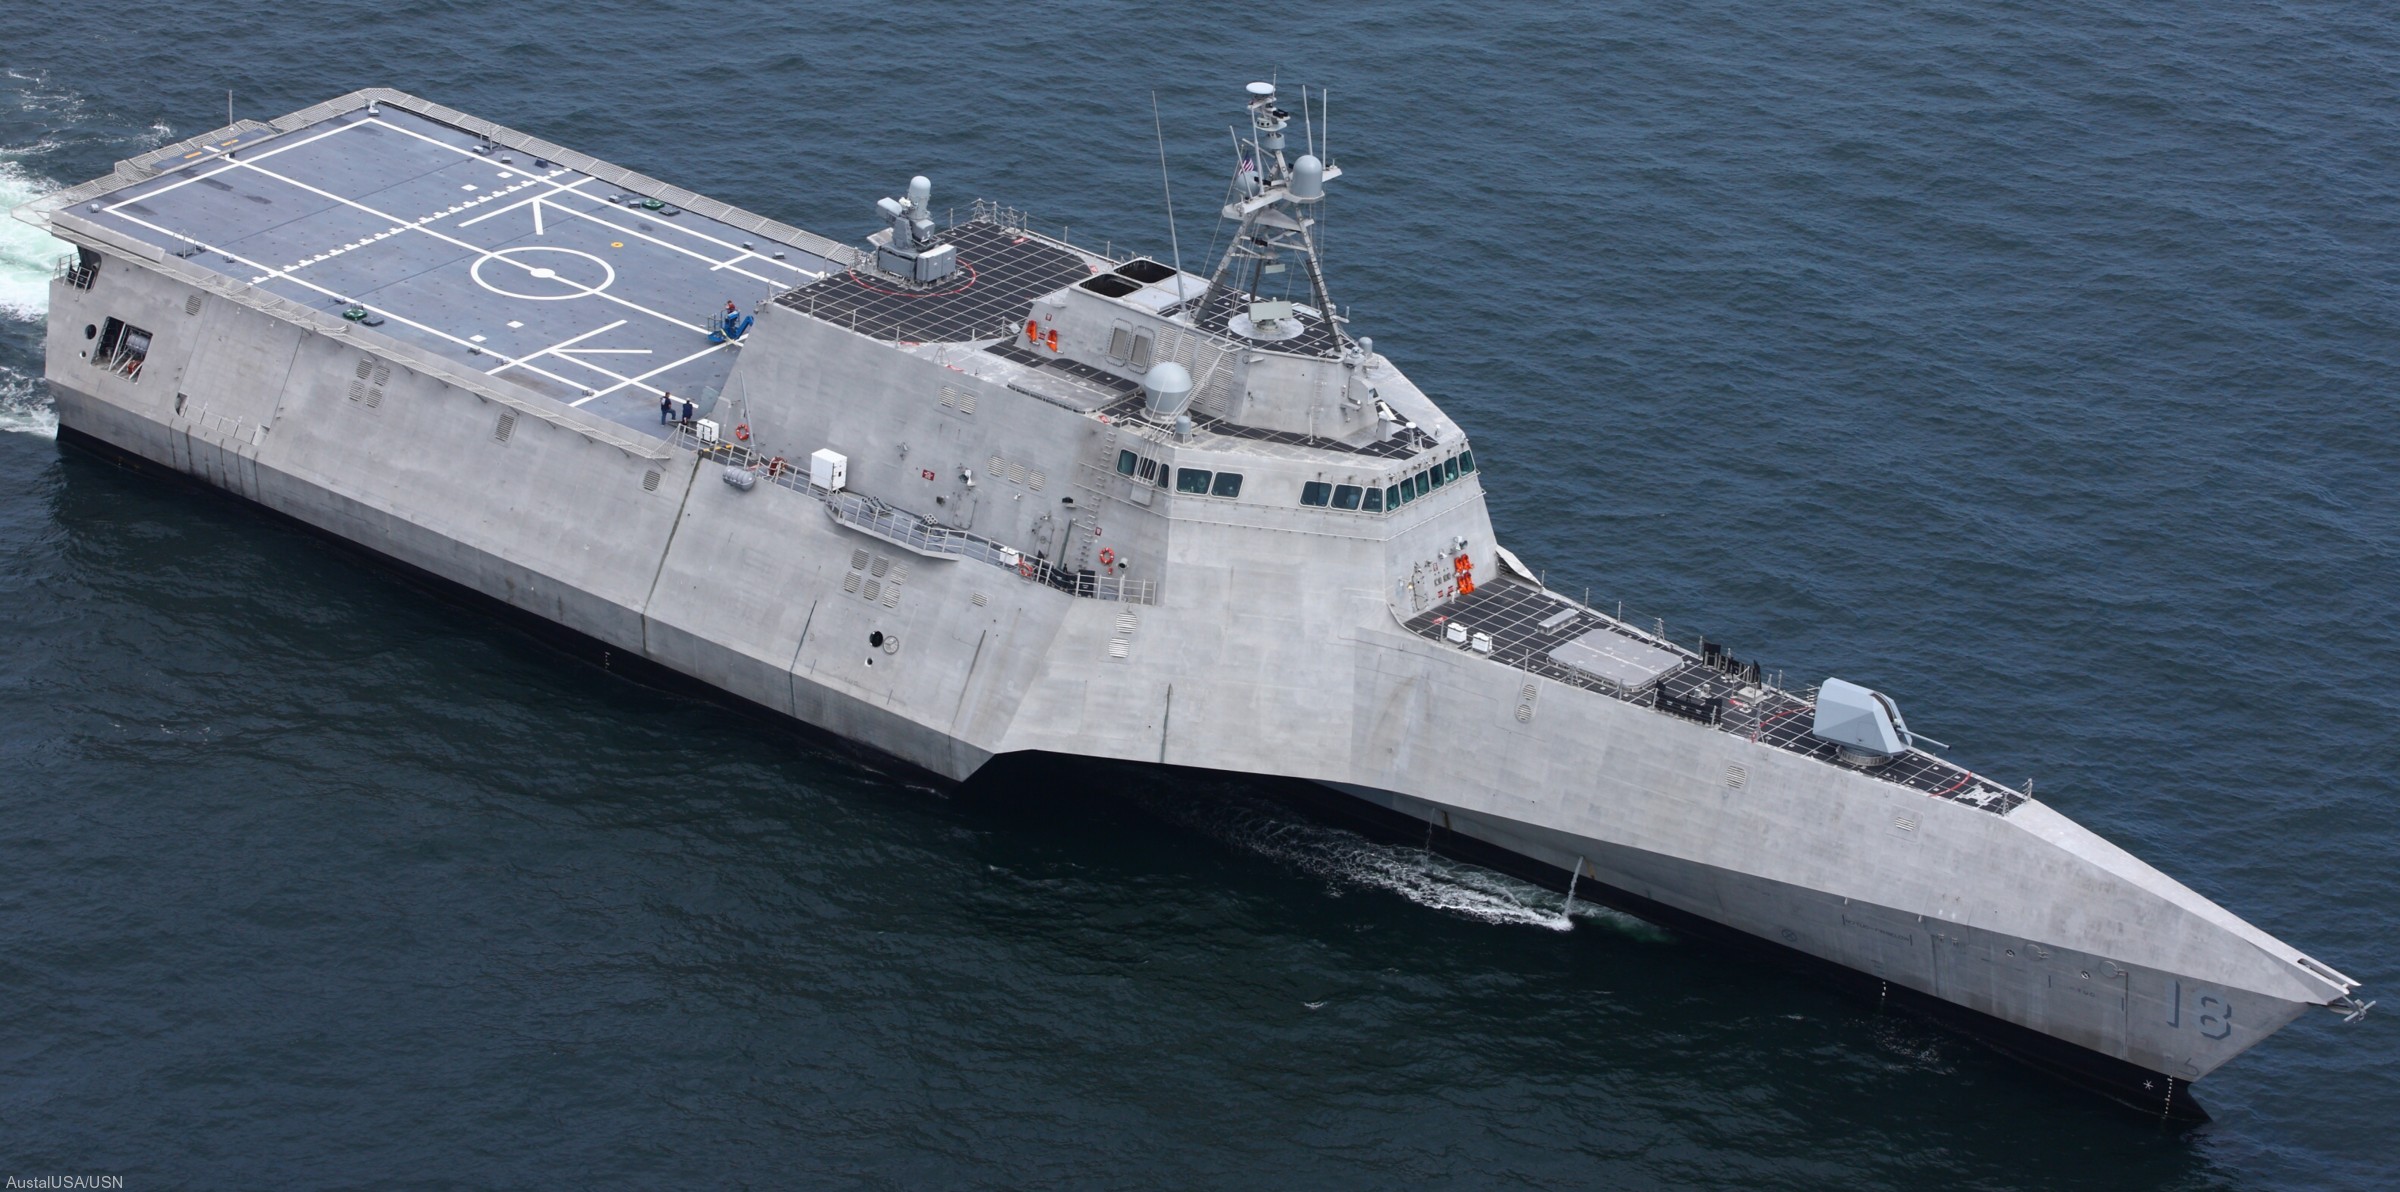 lcs-18 uss charleston independence class littoral combat ship us navy 02 acceptance trials